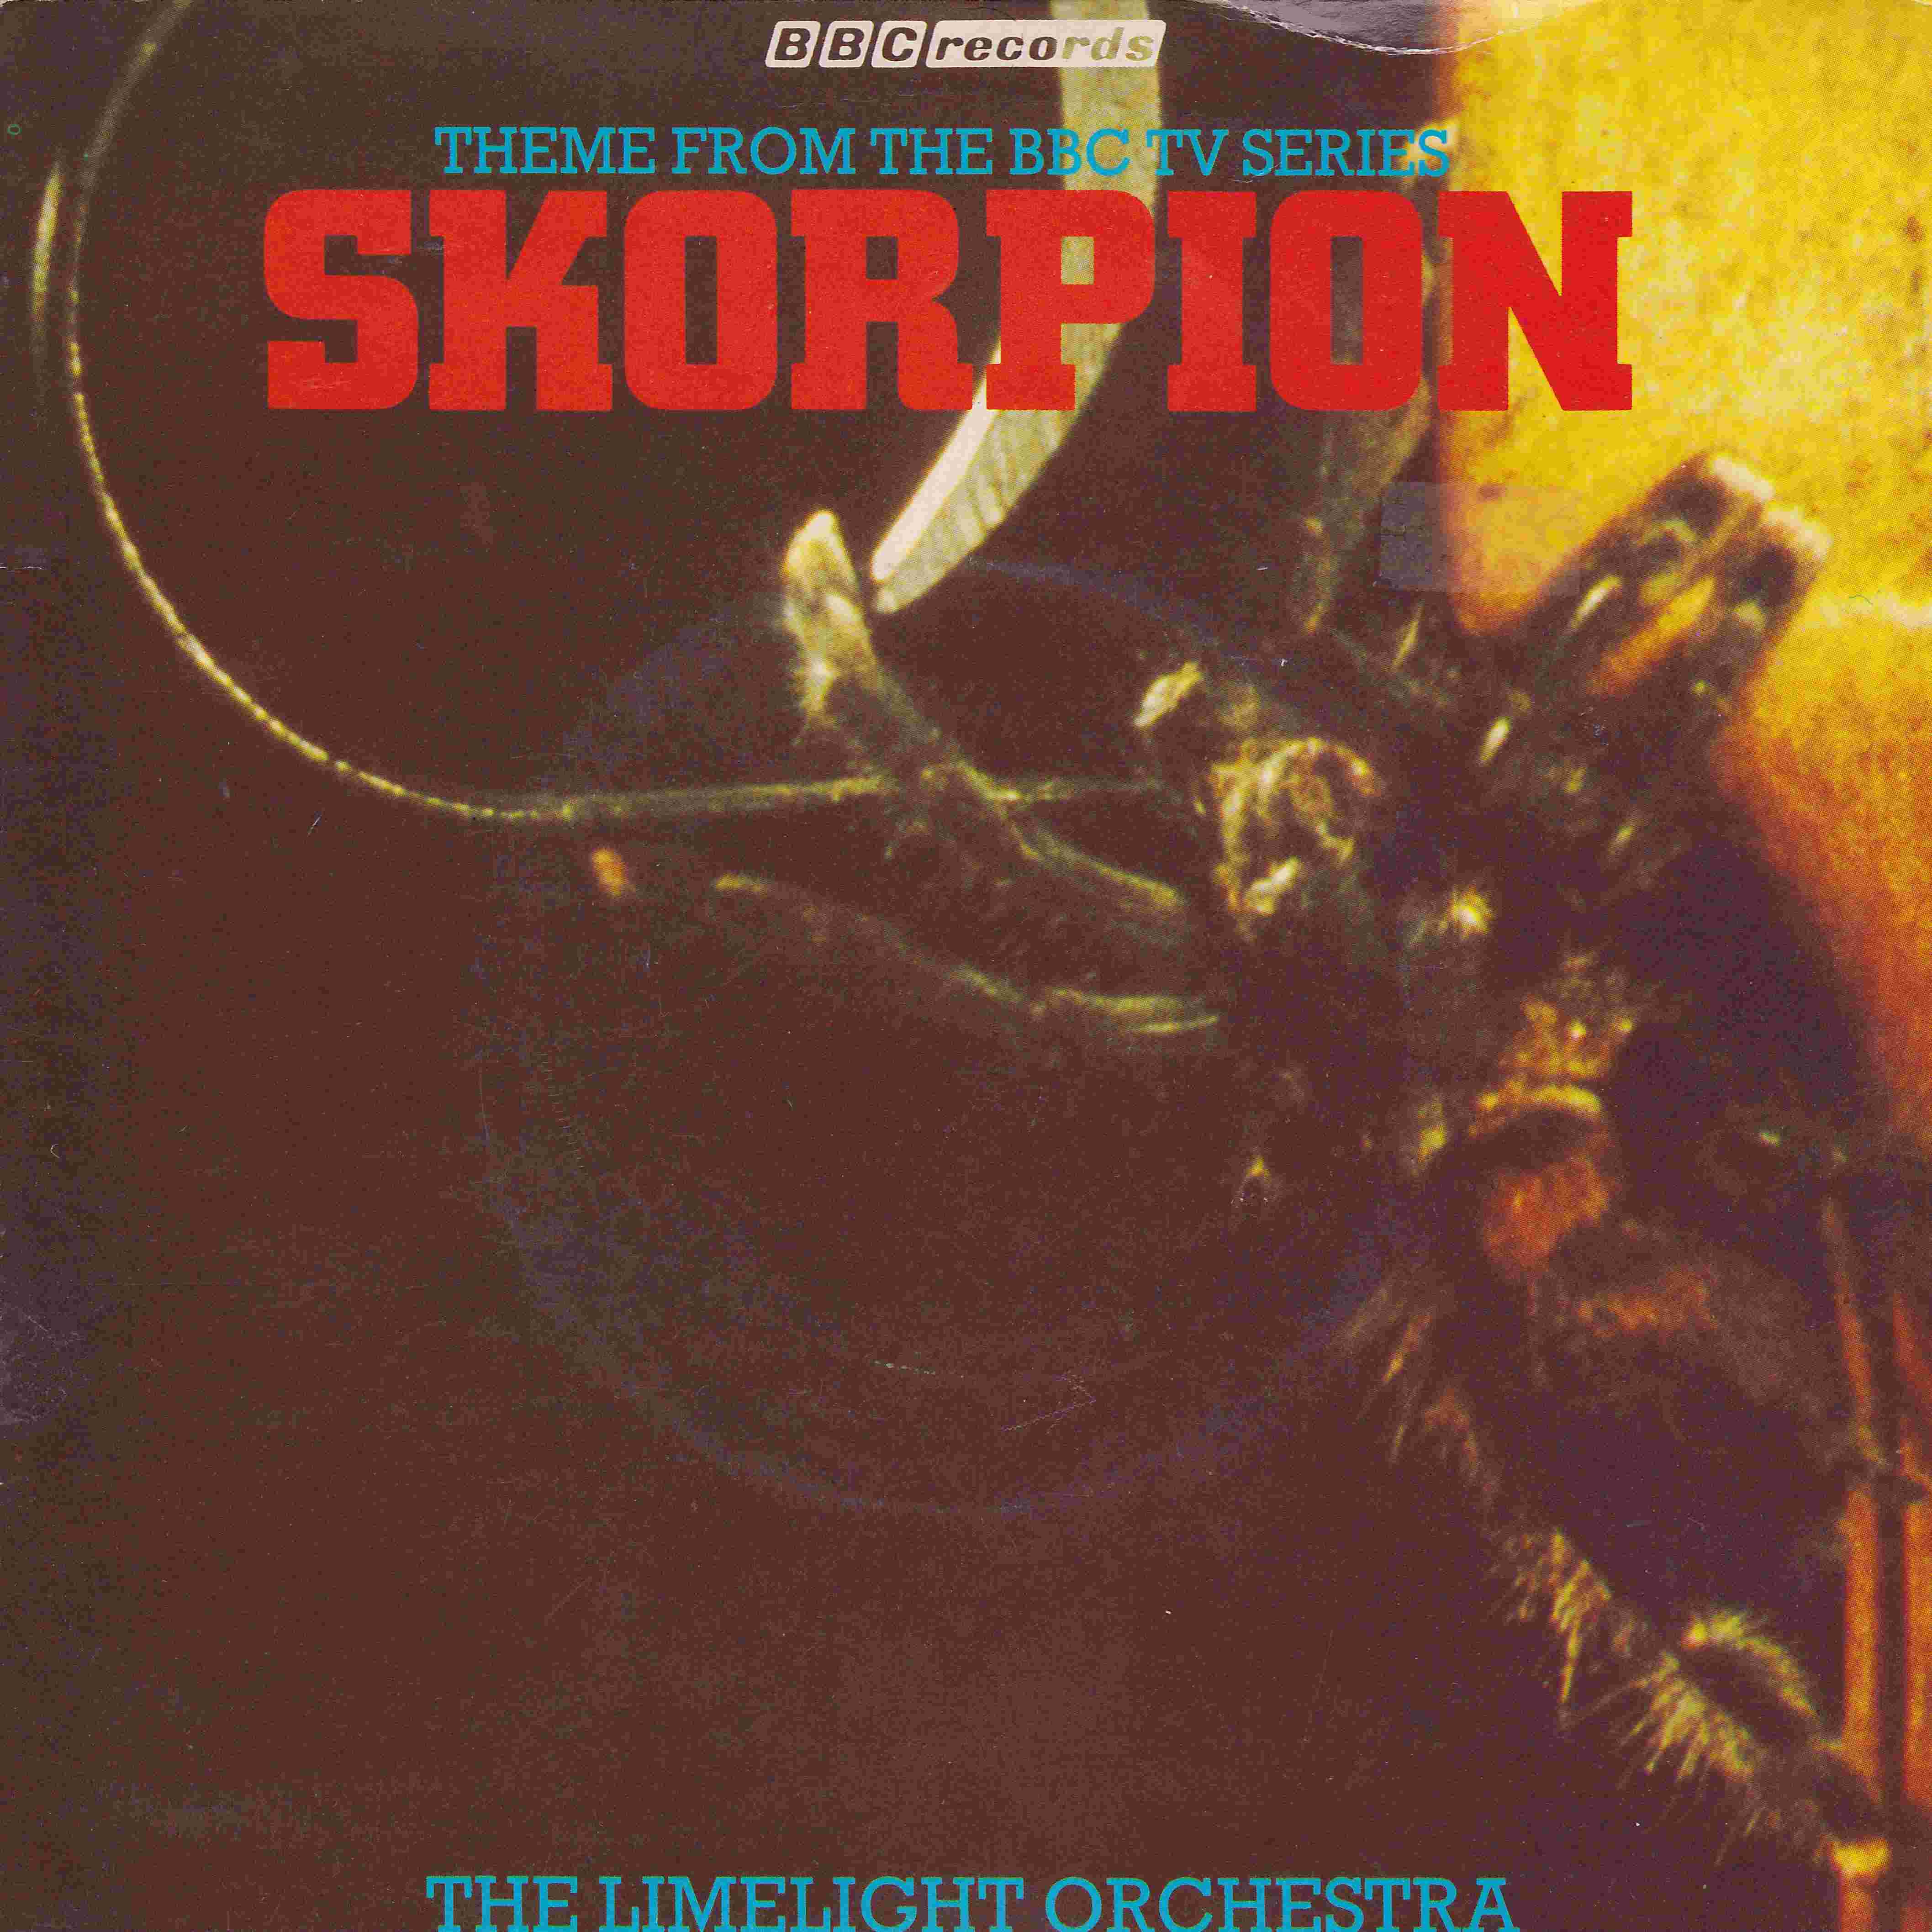 Picture of RESL 126 Skorpion by artist The Limelight Orchestra from the BBC records and Tapes library